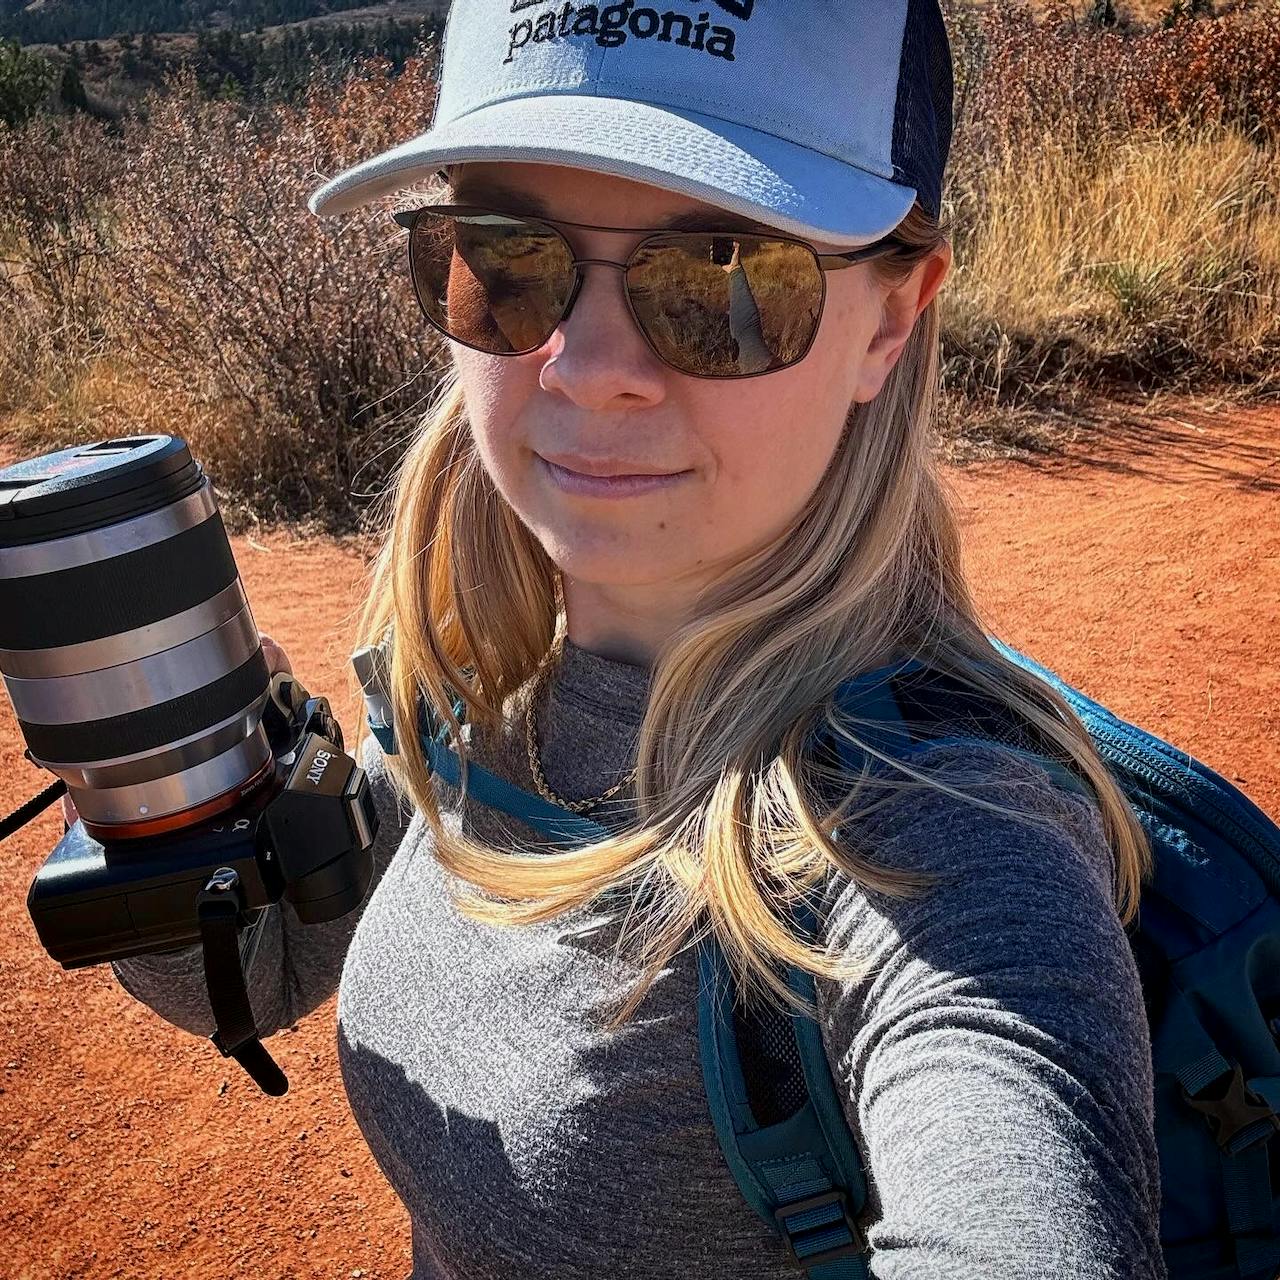 Selfie of Jade Pennig, wearing a hat and sunglasses, holding a Sony A7R camera